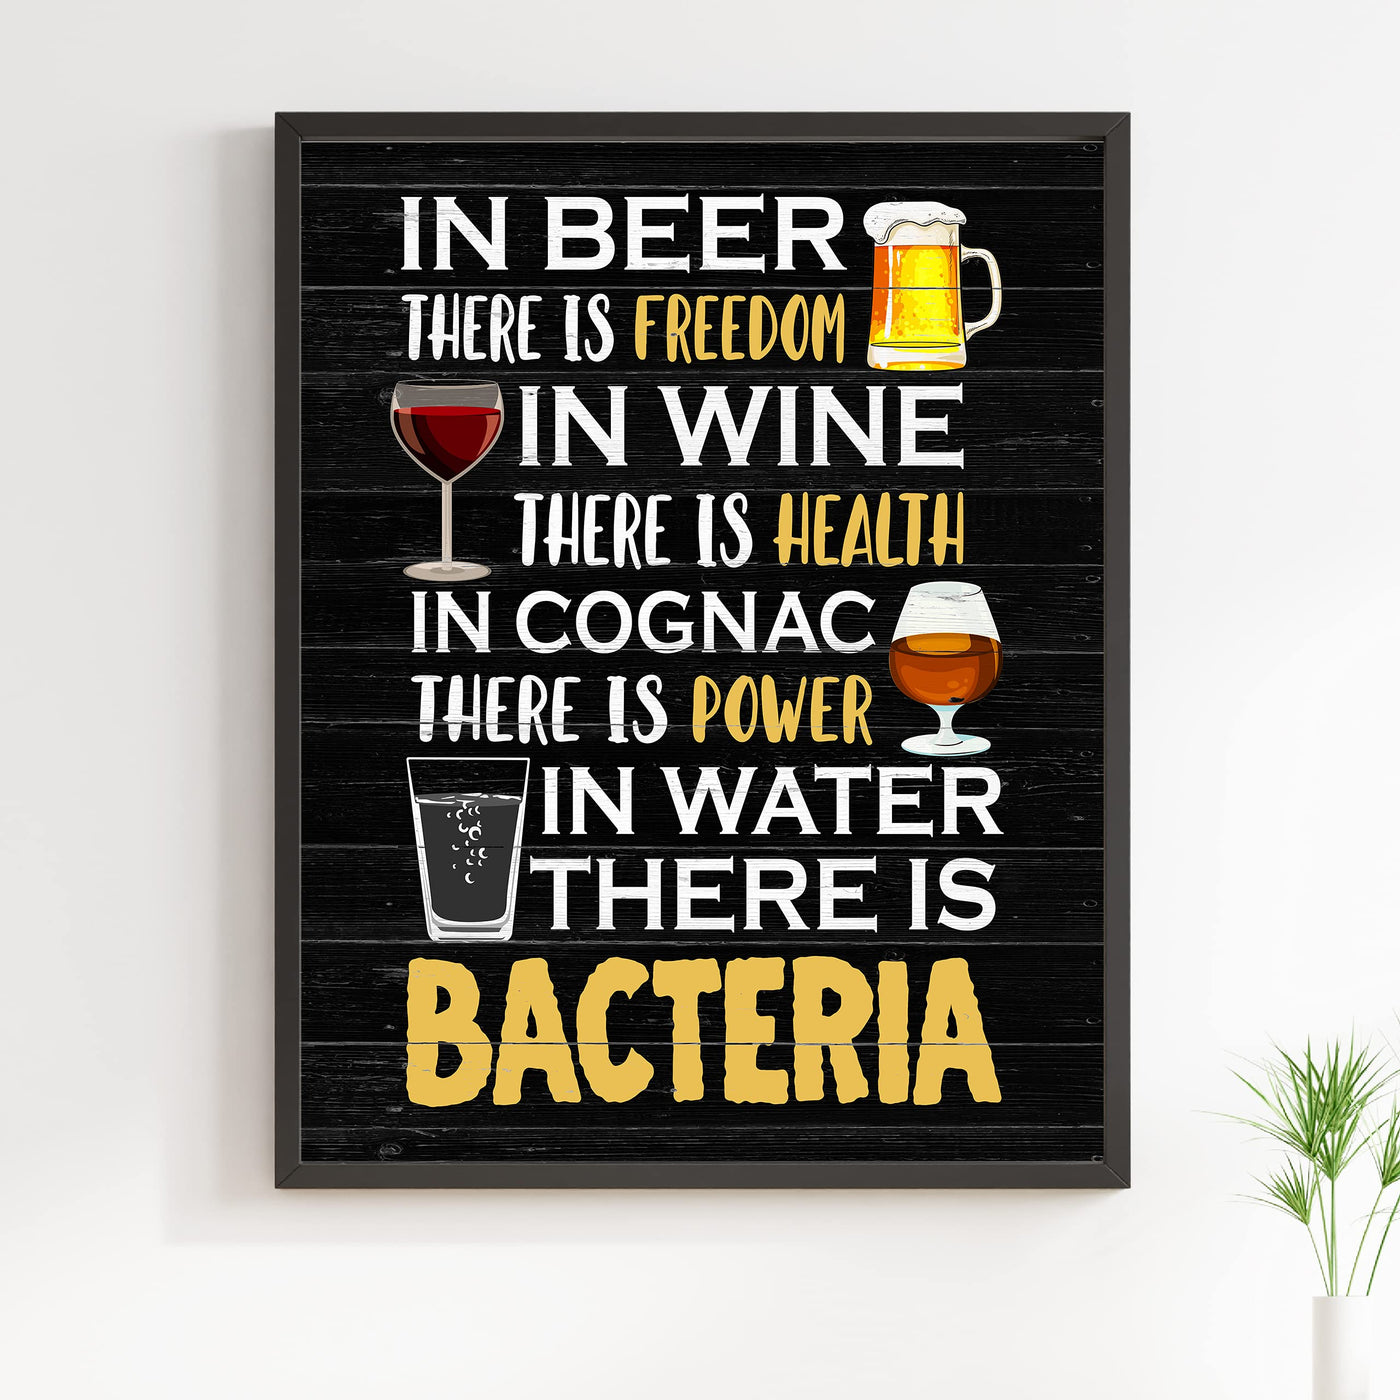 In Beer Is Freedom-In Water Is Bacteria Funny Wall Decor Sign-11x14" Rustic Typographic Art Print-Ready to Frame. Humorous Home-Kitchen-Bar-Shop-Cave Decor. Fun Gift for Alcohol-Beer-Wine Drinkers!